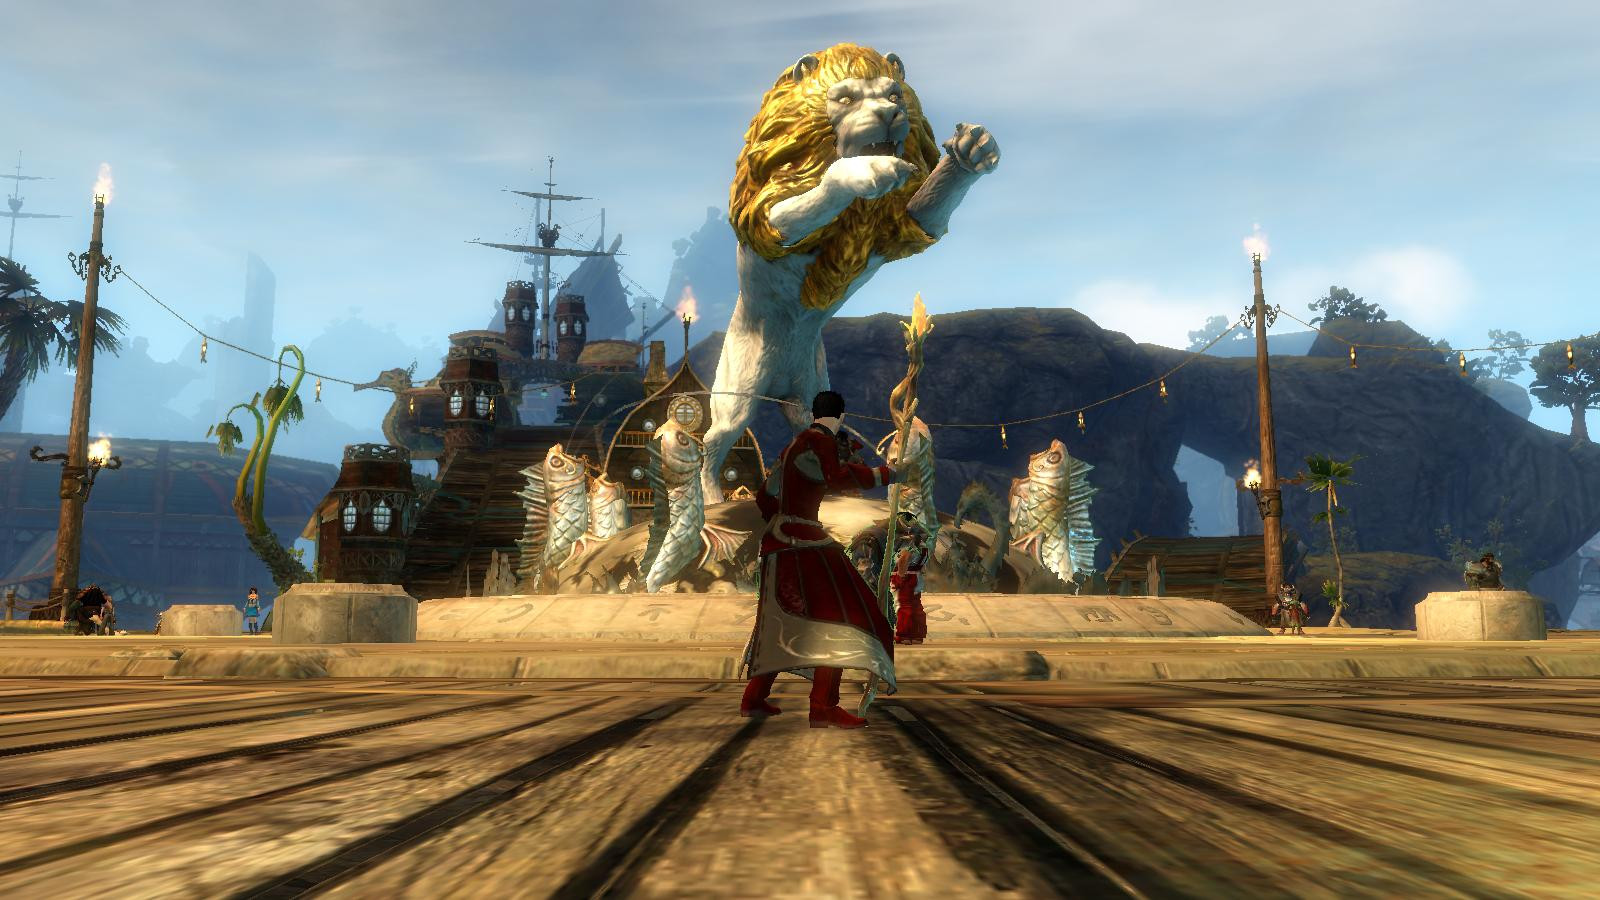 Guild-Wars-2-Is-Approaching-MMO-Reward-System-Limits-Says-ArenaNet-2.jpg